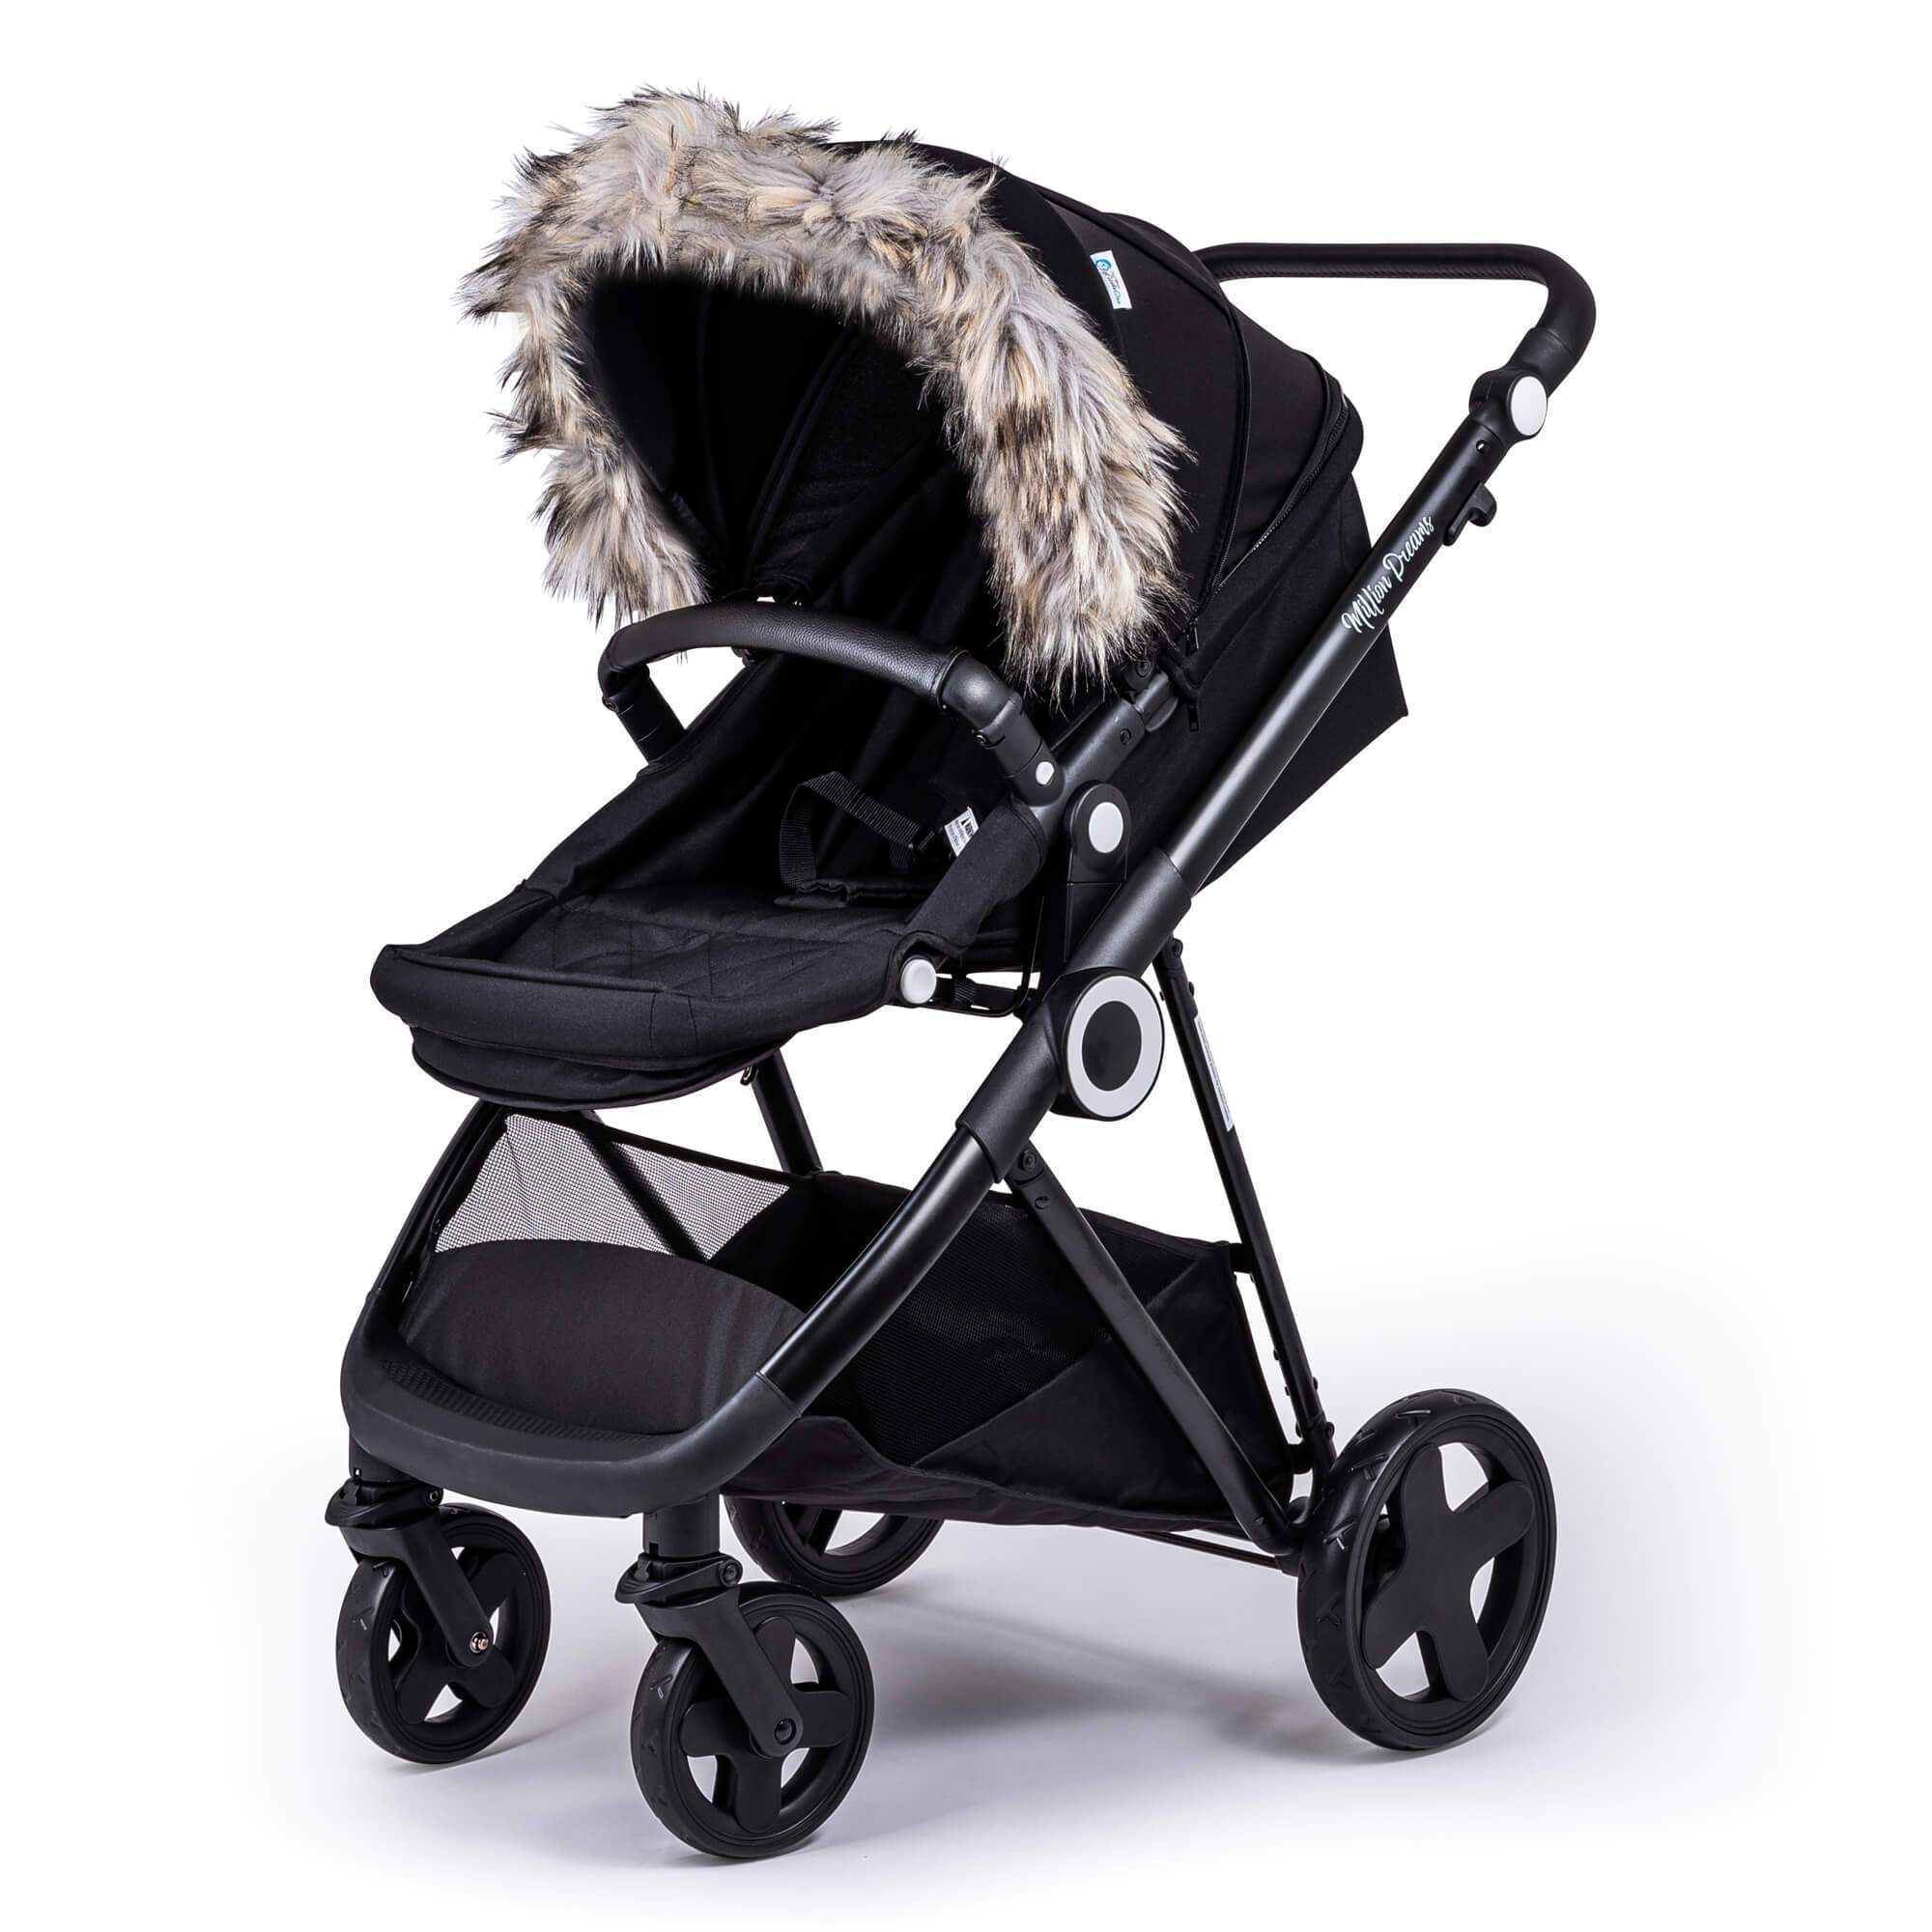 Pram Fur Hood Trim Attachment For Pushchair Compatible with Tutti Bambini - Light Grey / Fits All Models | For Your Little One